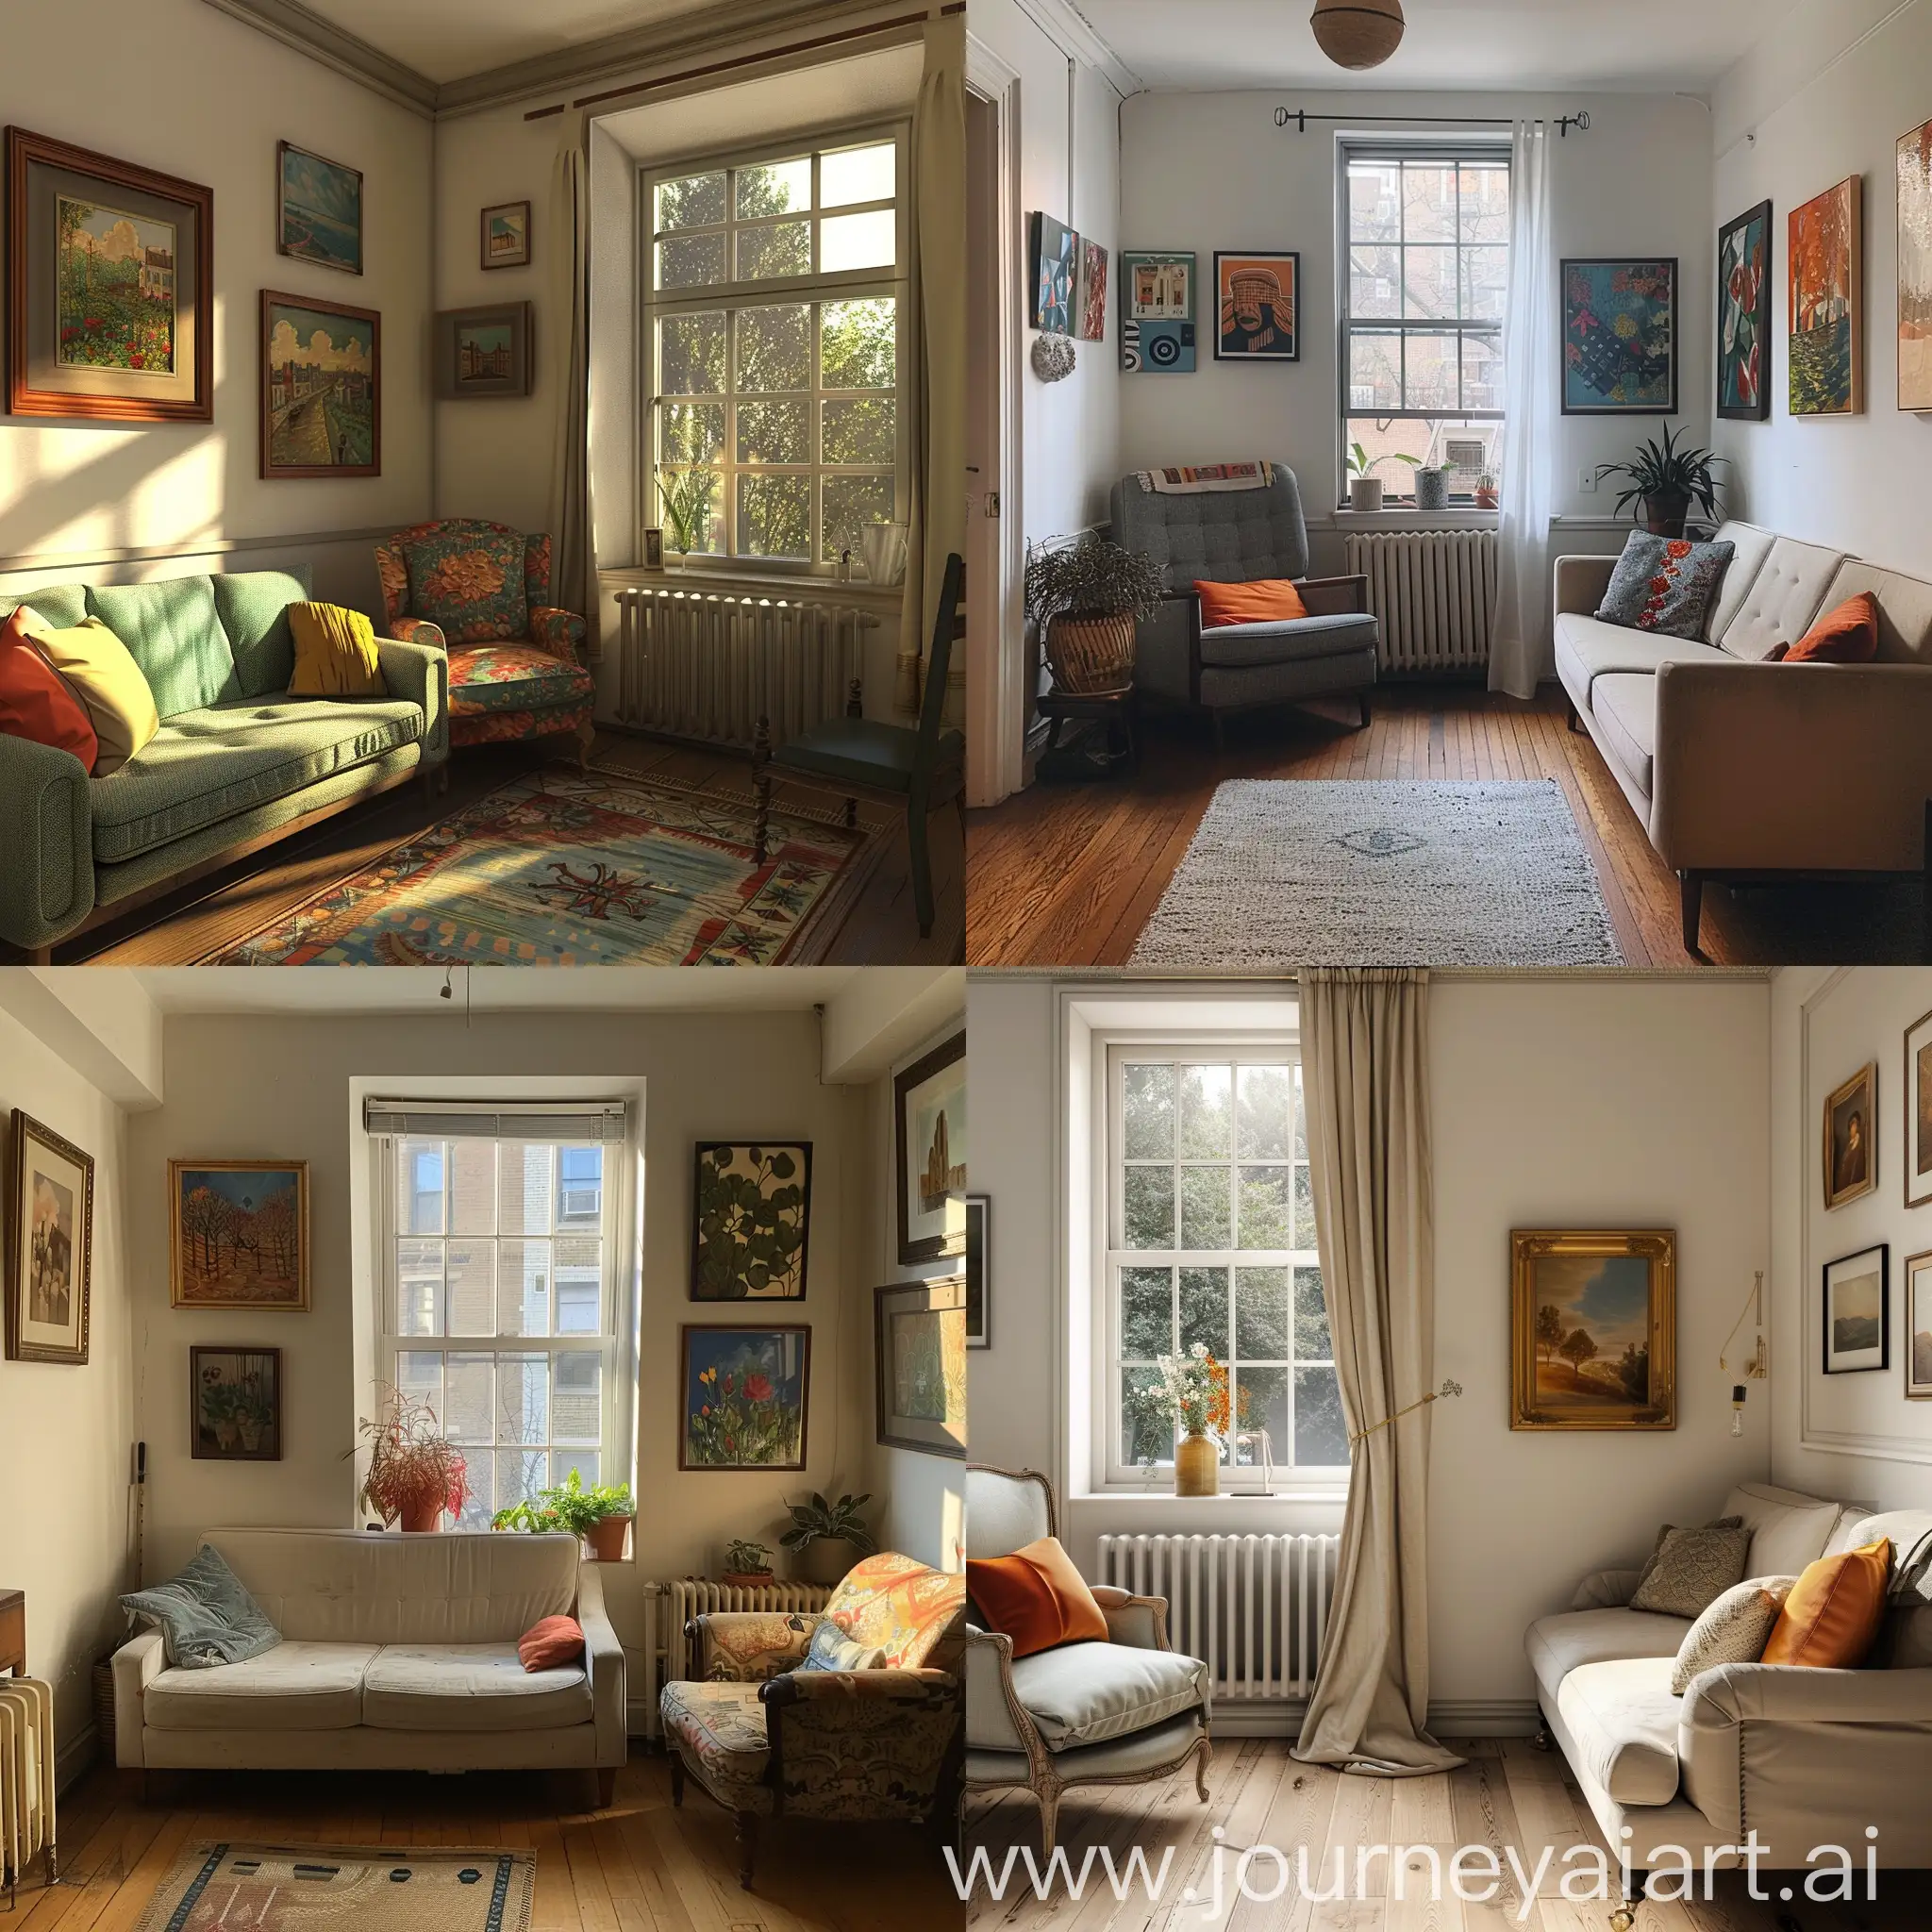 A simple room in an apartment with a sofa, an armchair, a window, and a few paintings on the wall